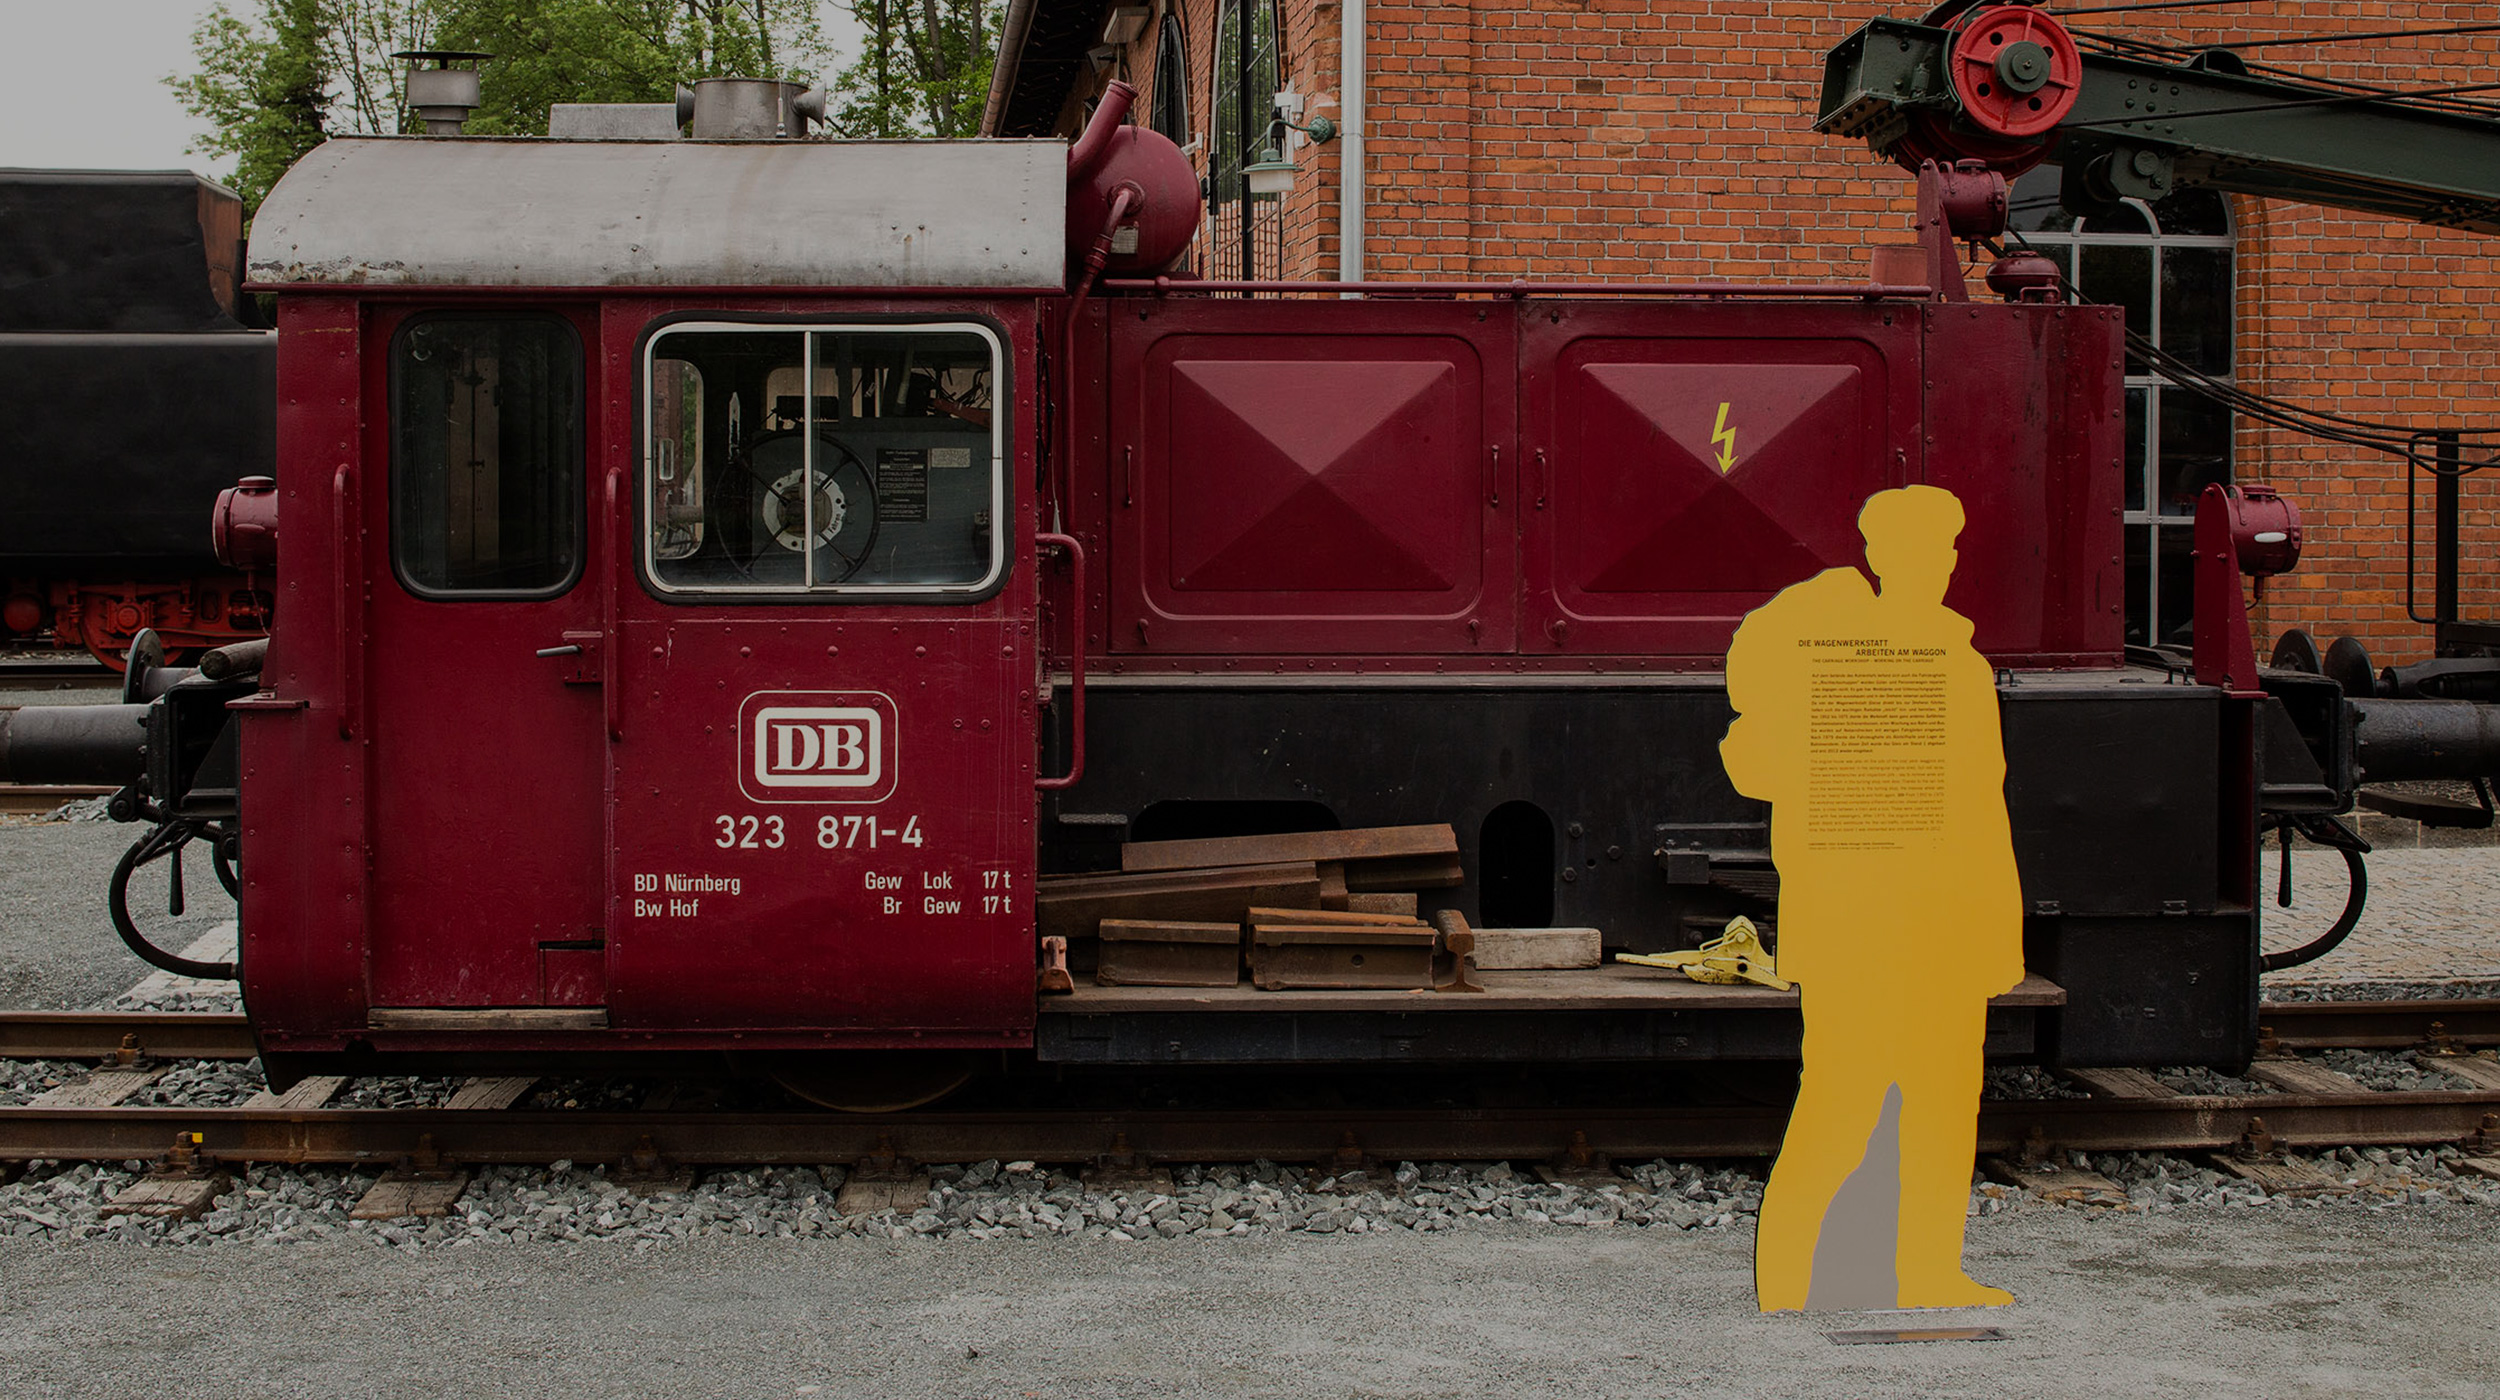 A life-size cut out figurine with information printed on it standing in front of a small diesel locomotive